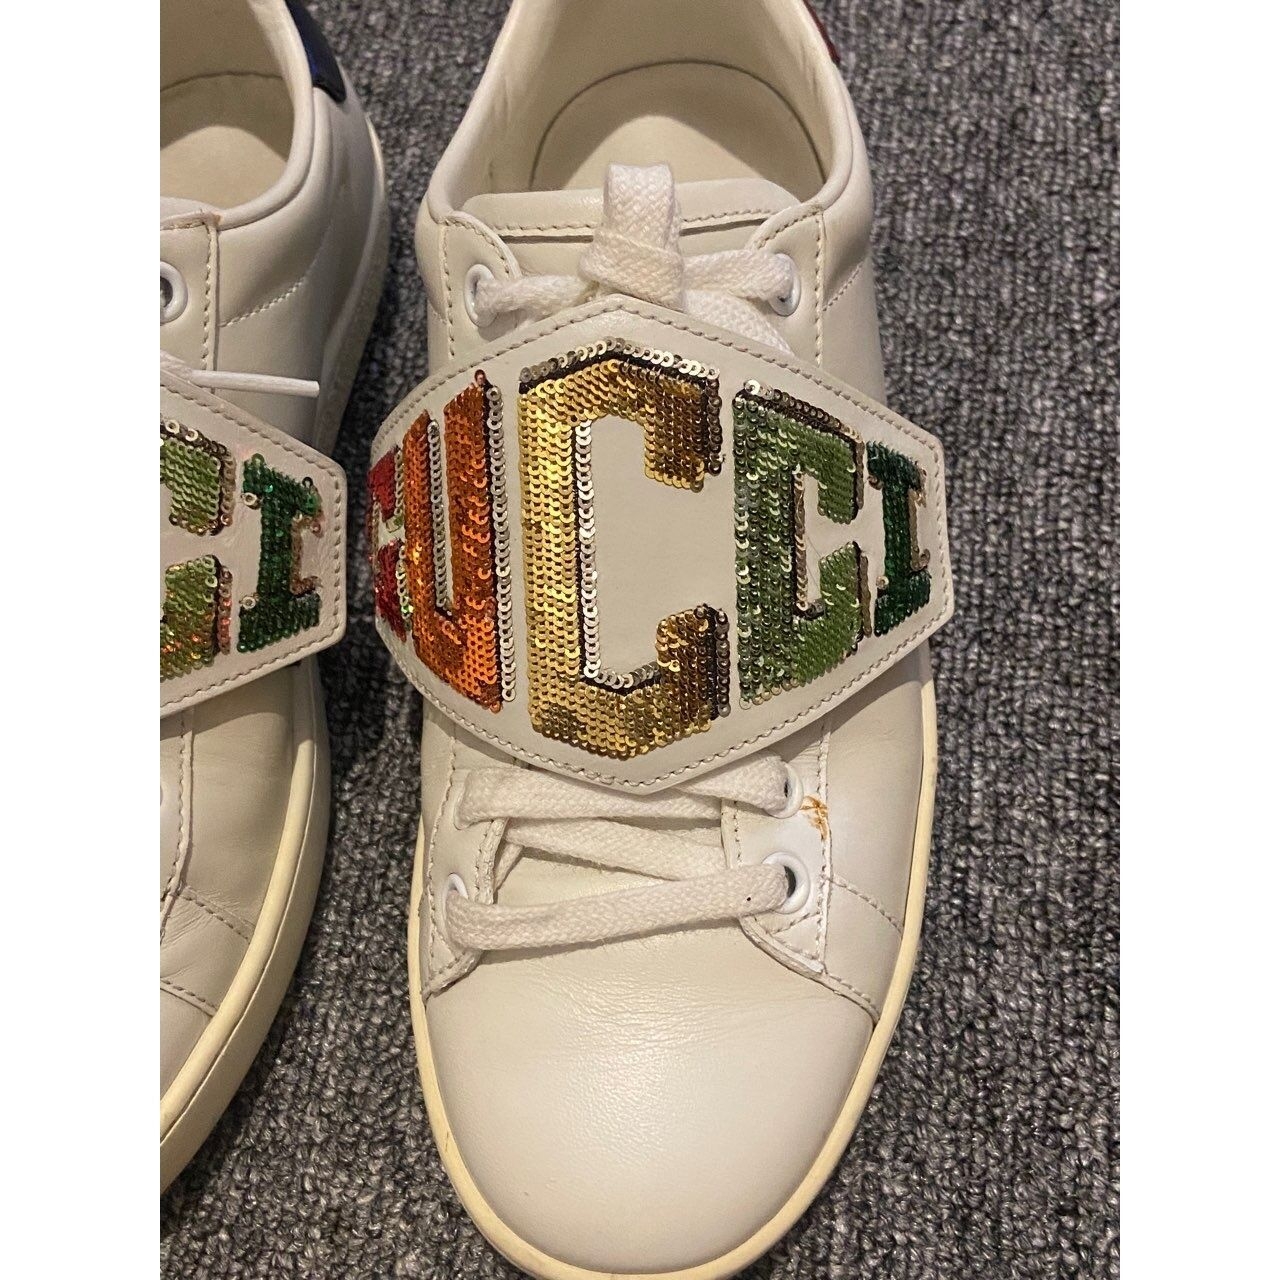 Gucci White Leather Sequin Embellished Ace Low Top Sneakers